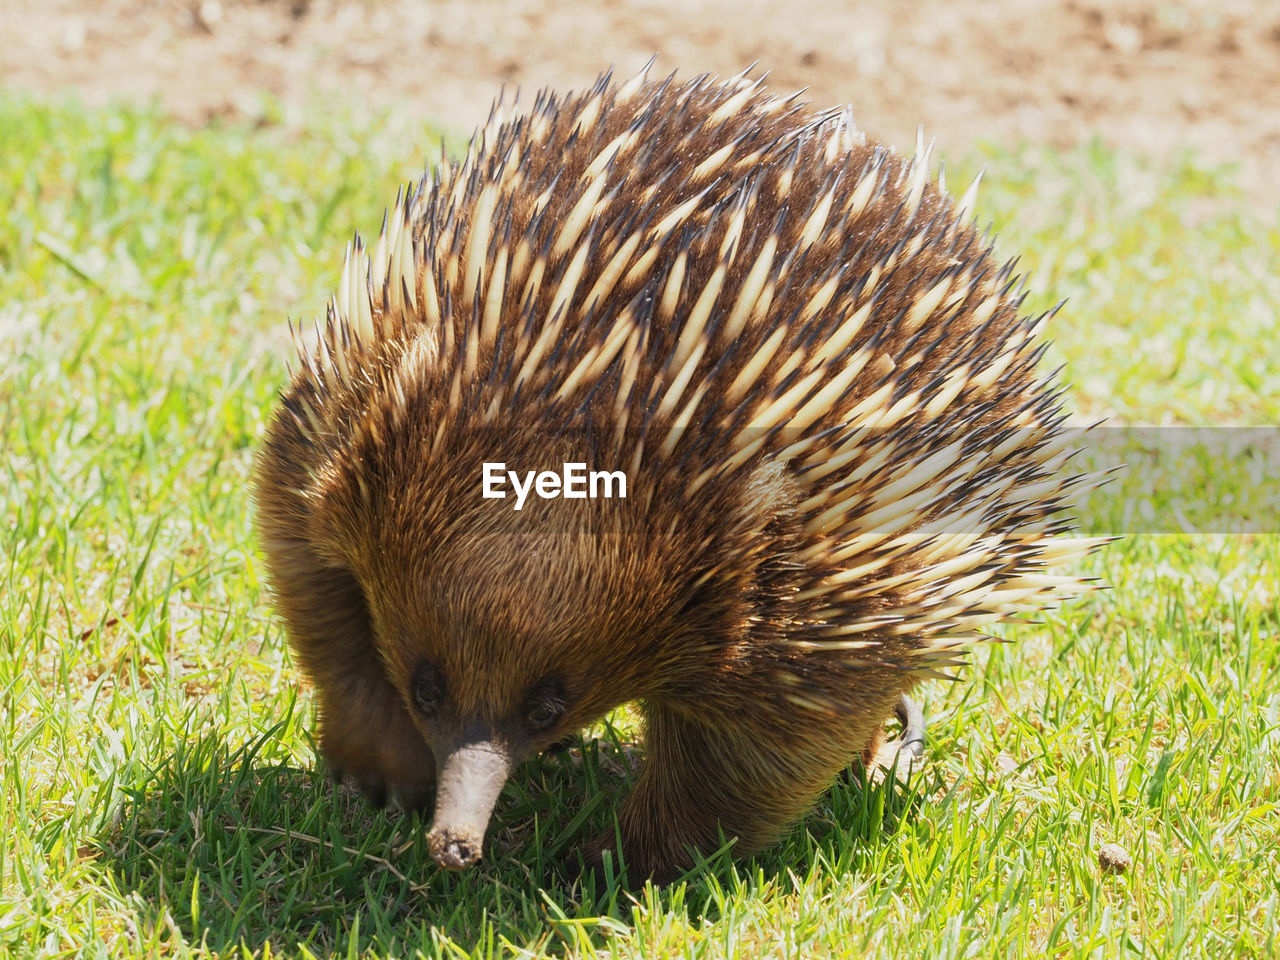 Echidna ready to charge